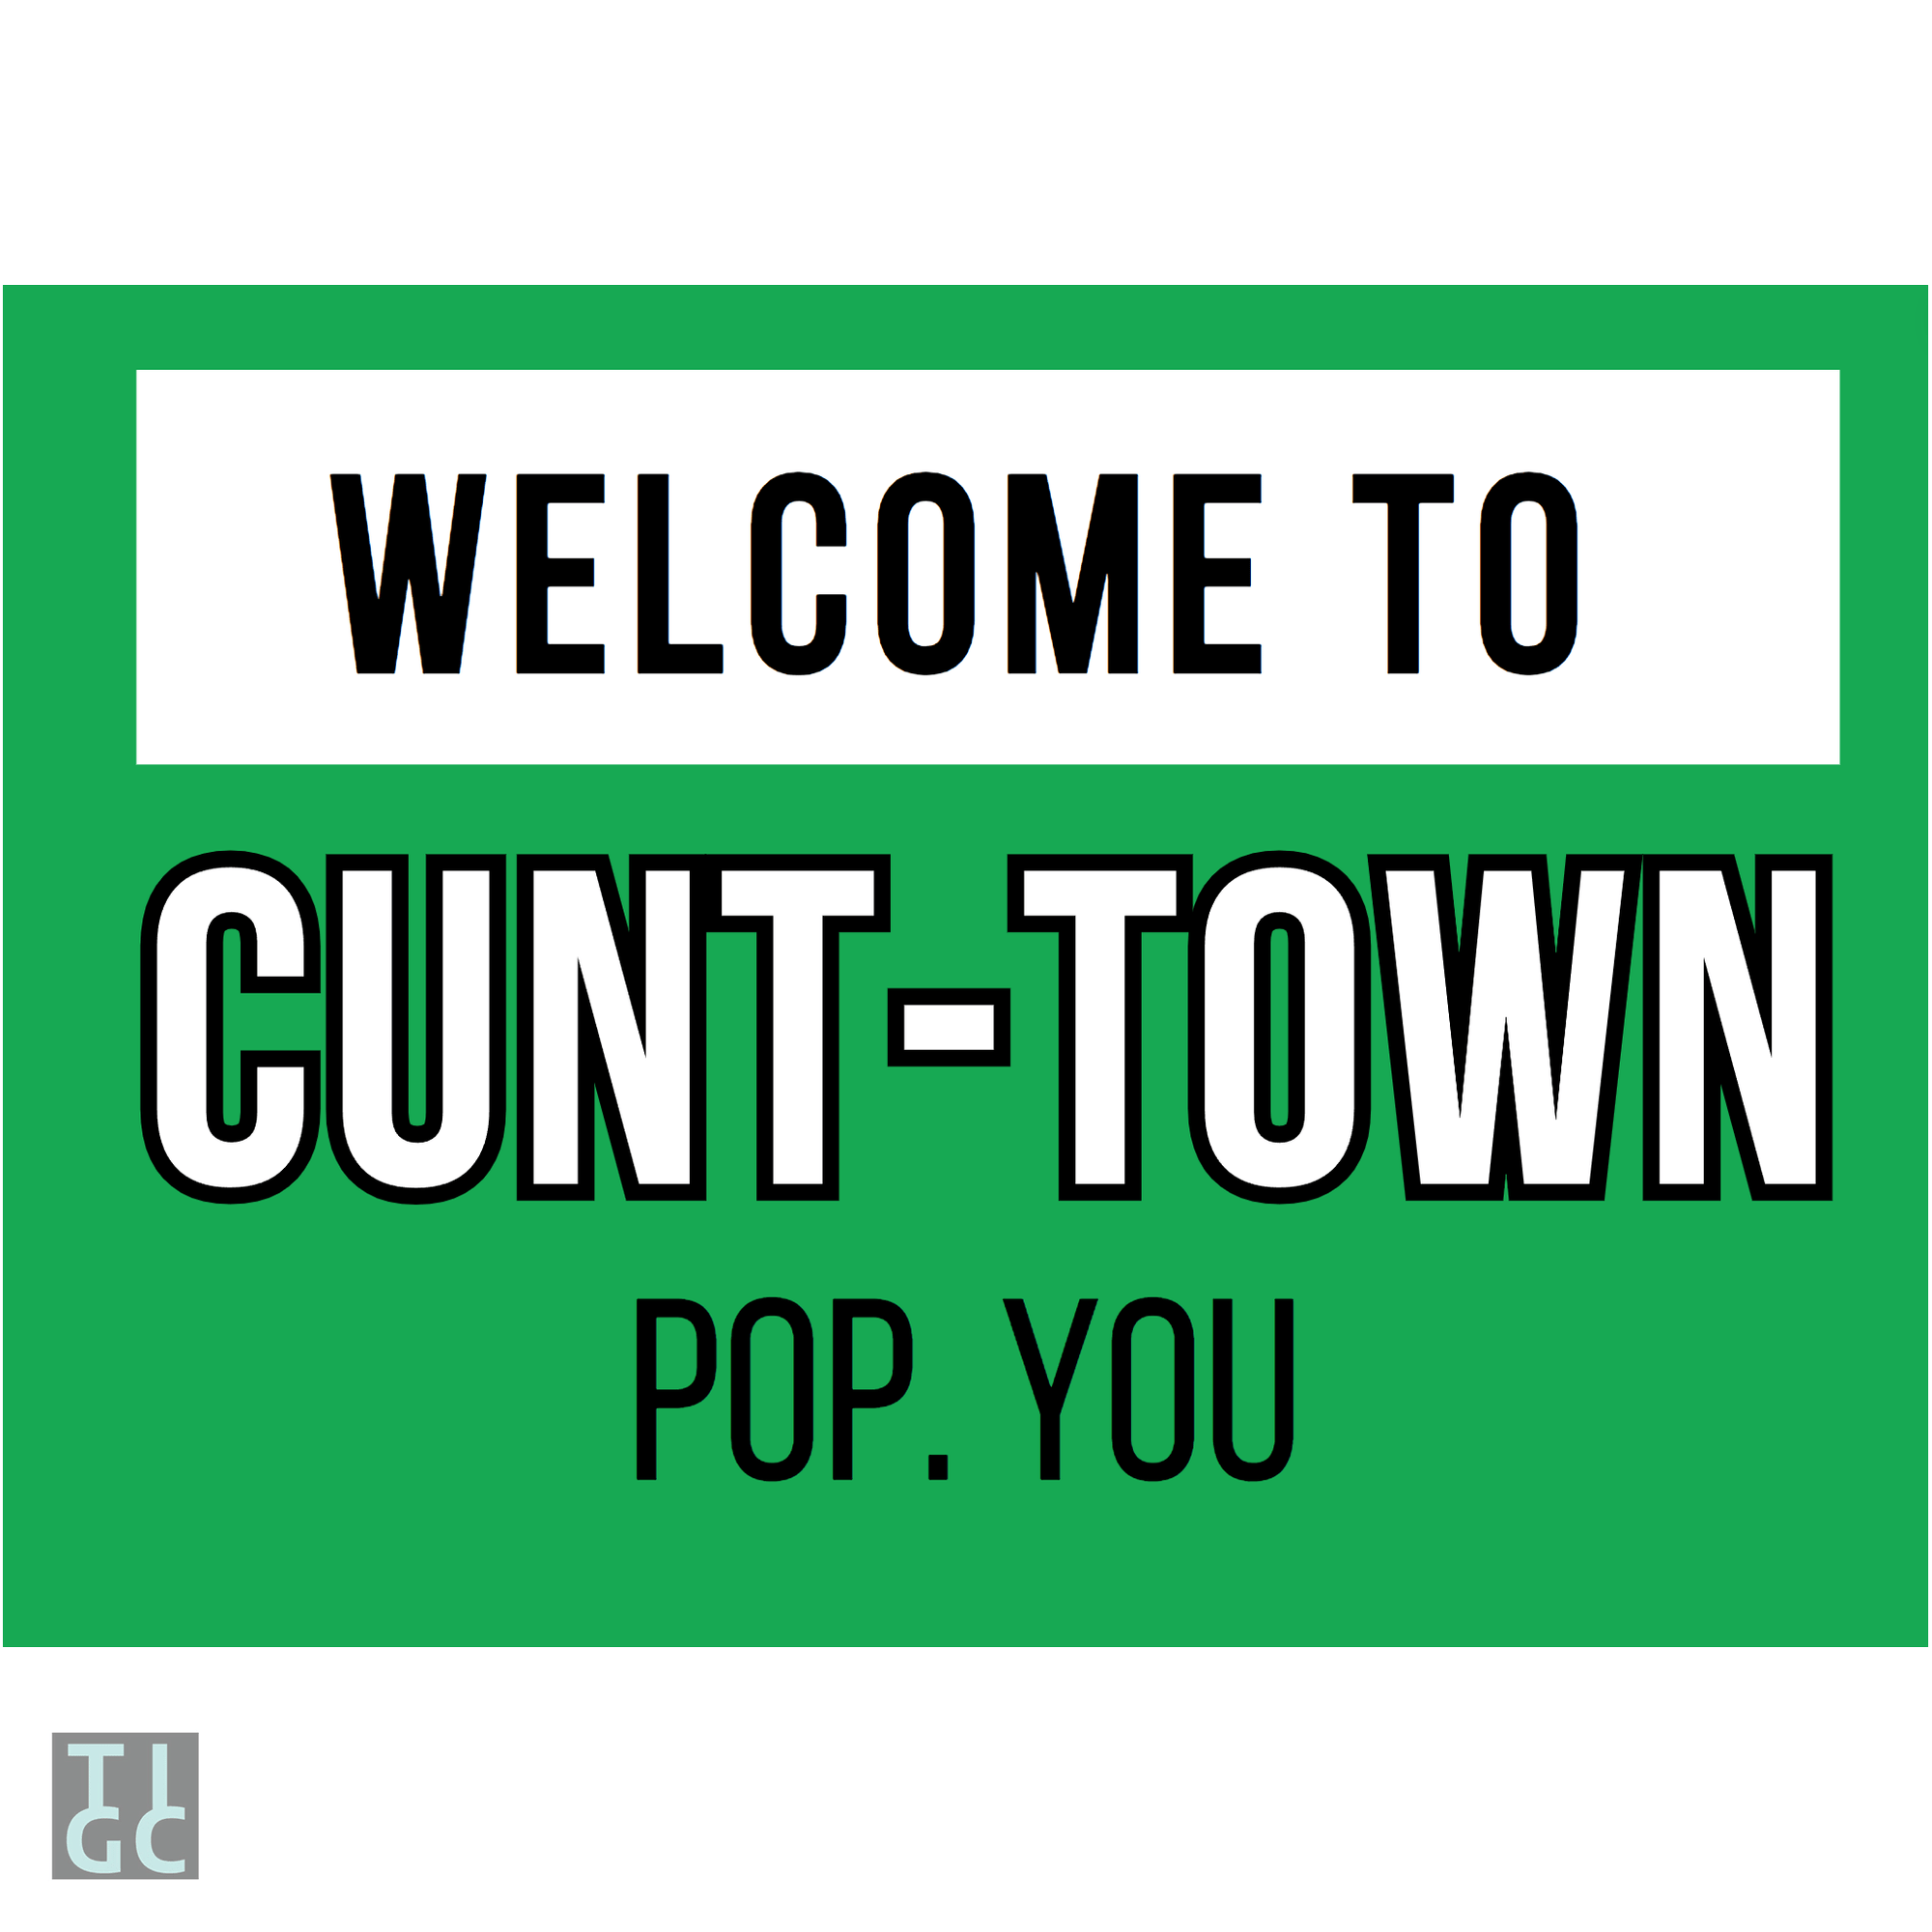 TIGC The Inappropriate Gift Co Welcome to cunt town sign (Digital Download Only)